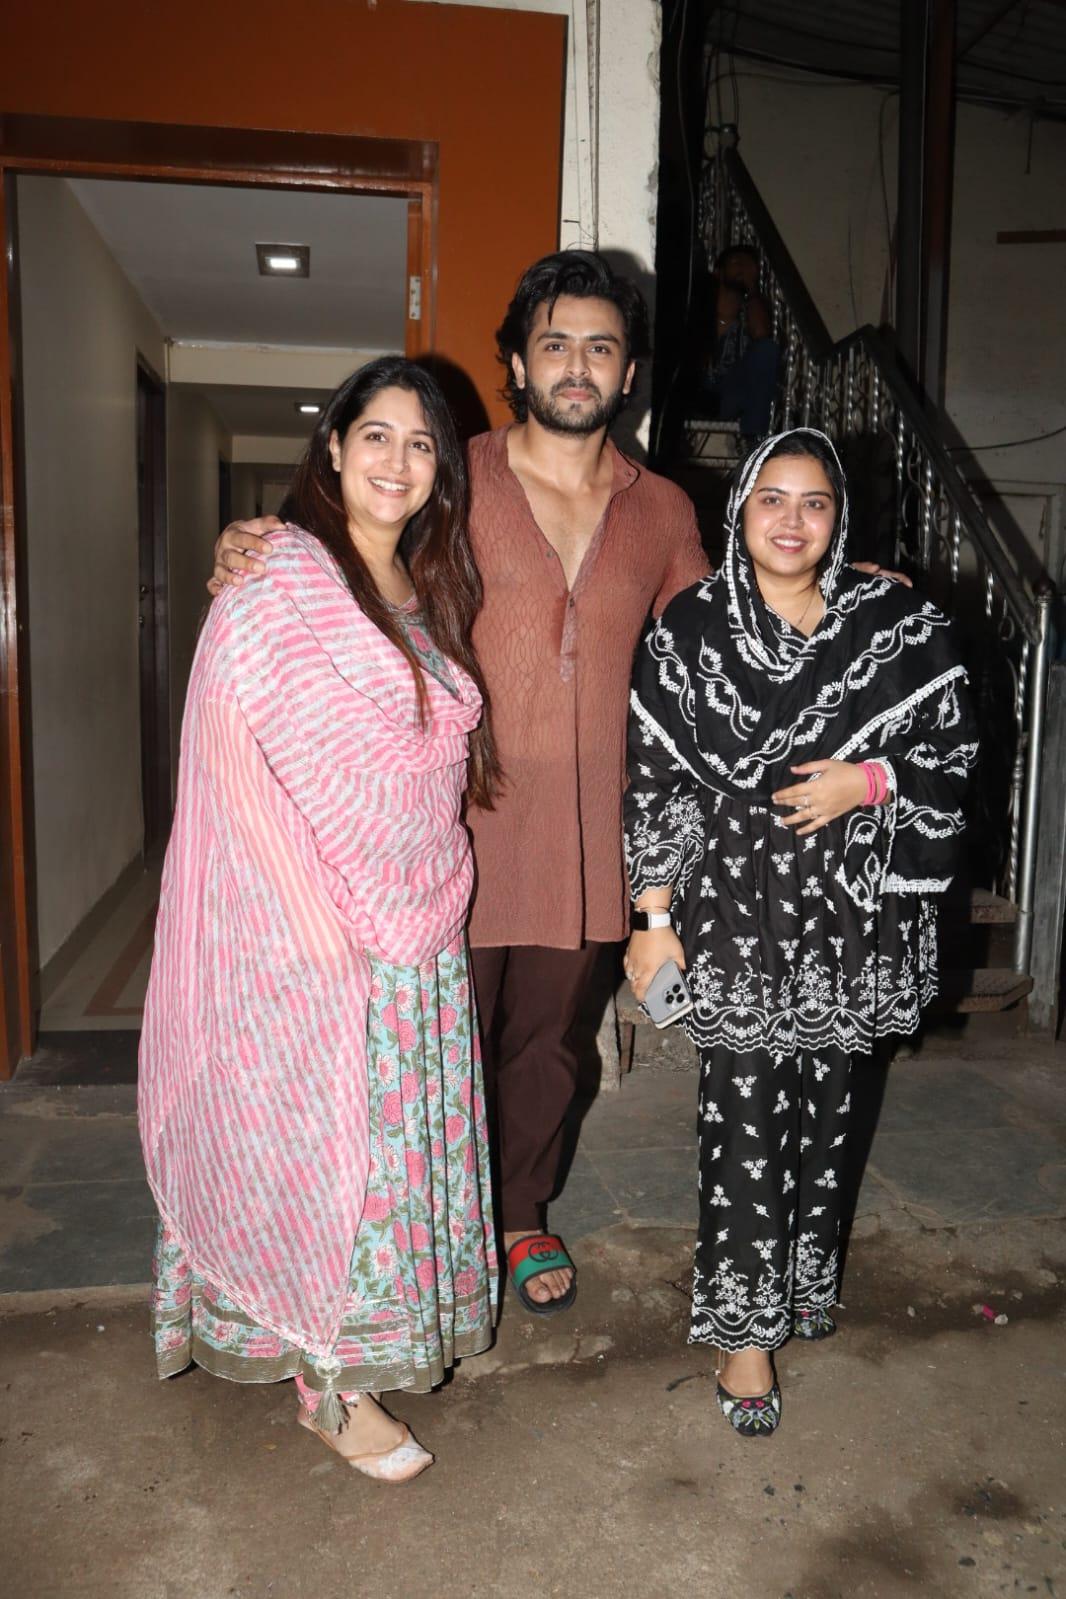 Dipika Kakkar, Shoaib Ibrahim and Saba Ibrahim posed for the paparazzi as the were spotted in the city